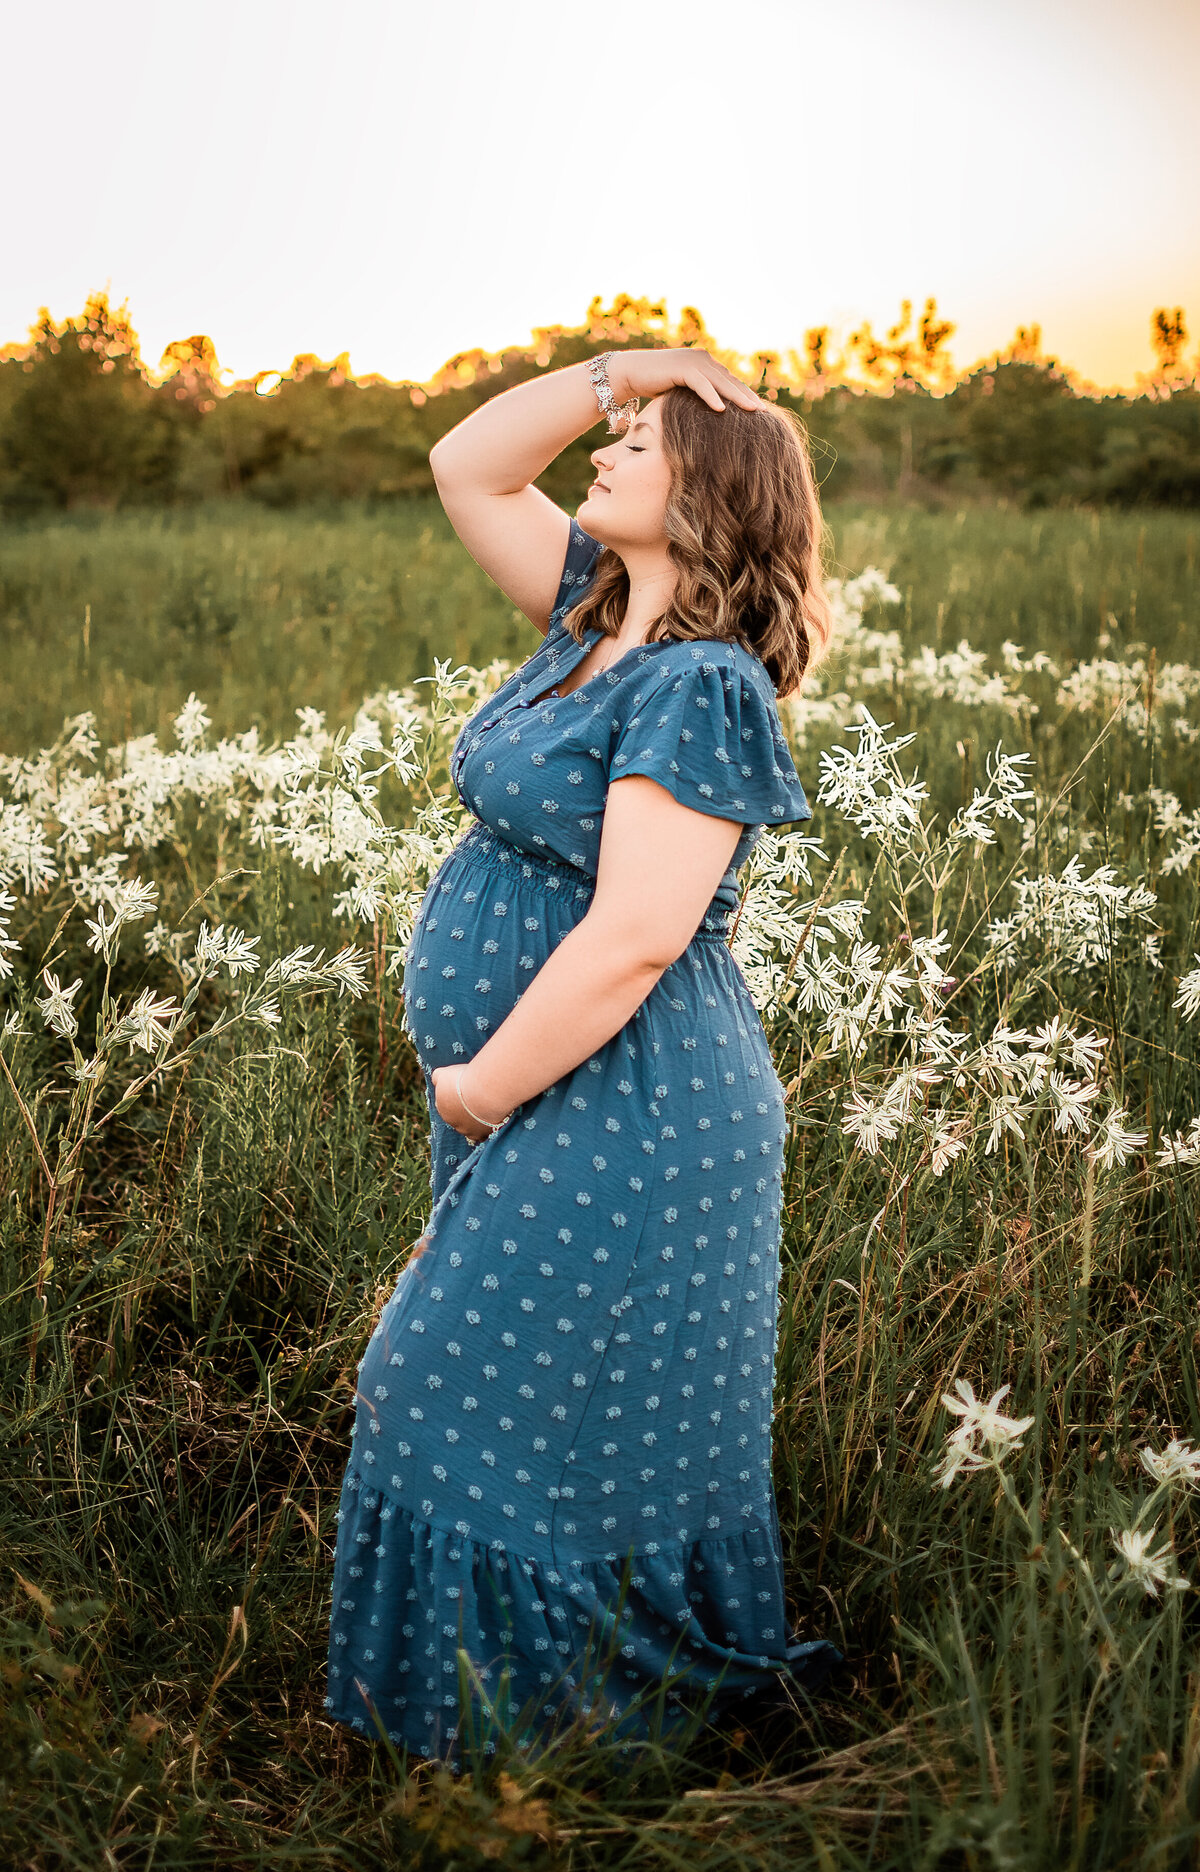 At a Harris county park, a mom to be stands in a field of white flowers as she looks toward the sky and holds her baby bump.